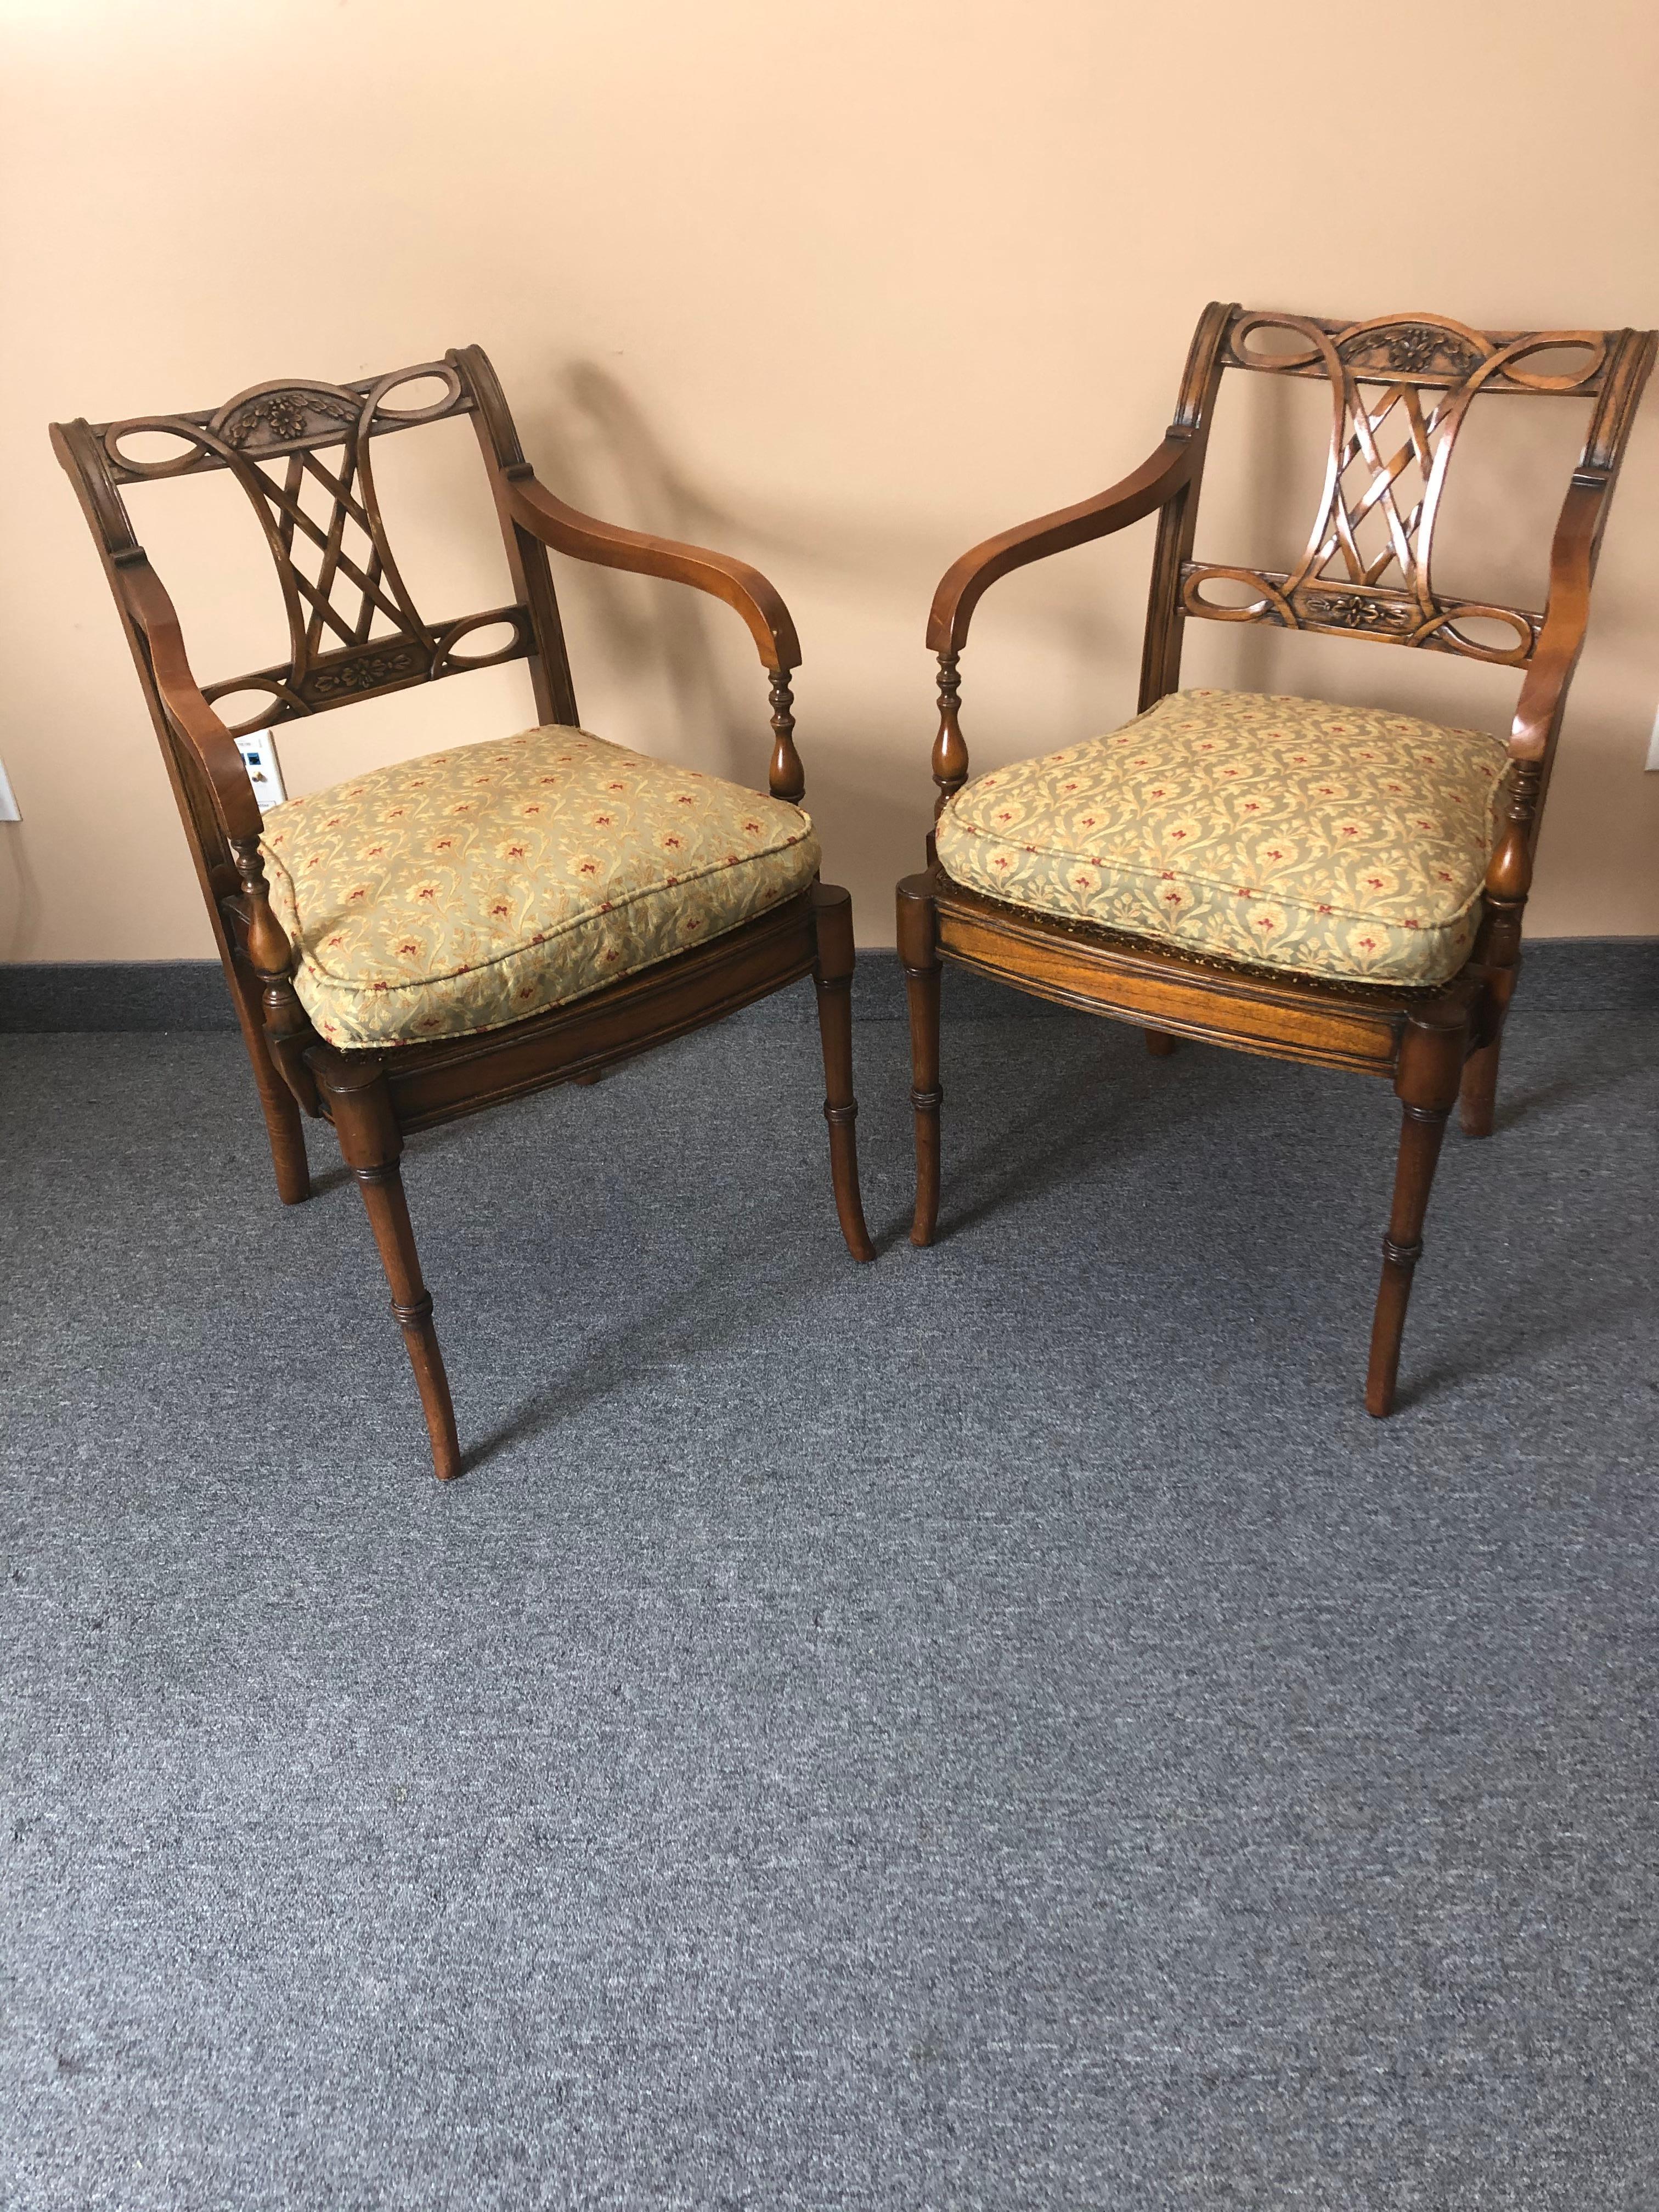 Refined pair of carved mahogany armchairs having beautiful details on the arms and legs and caned seats. Custom cushions are included.